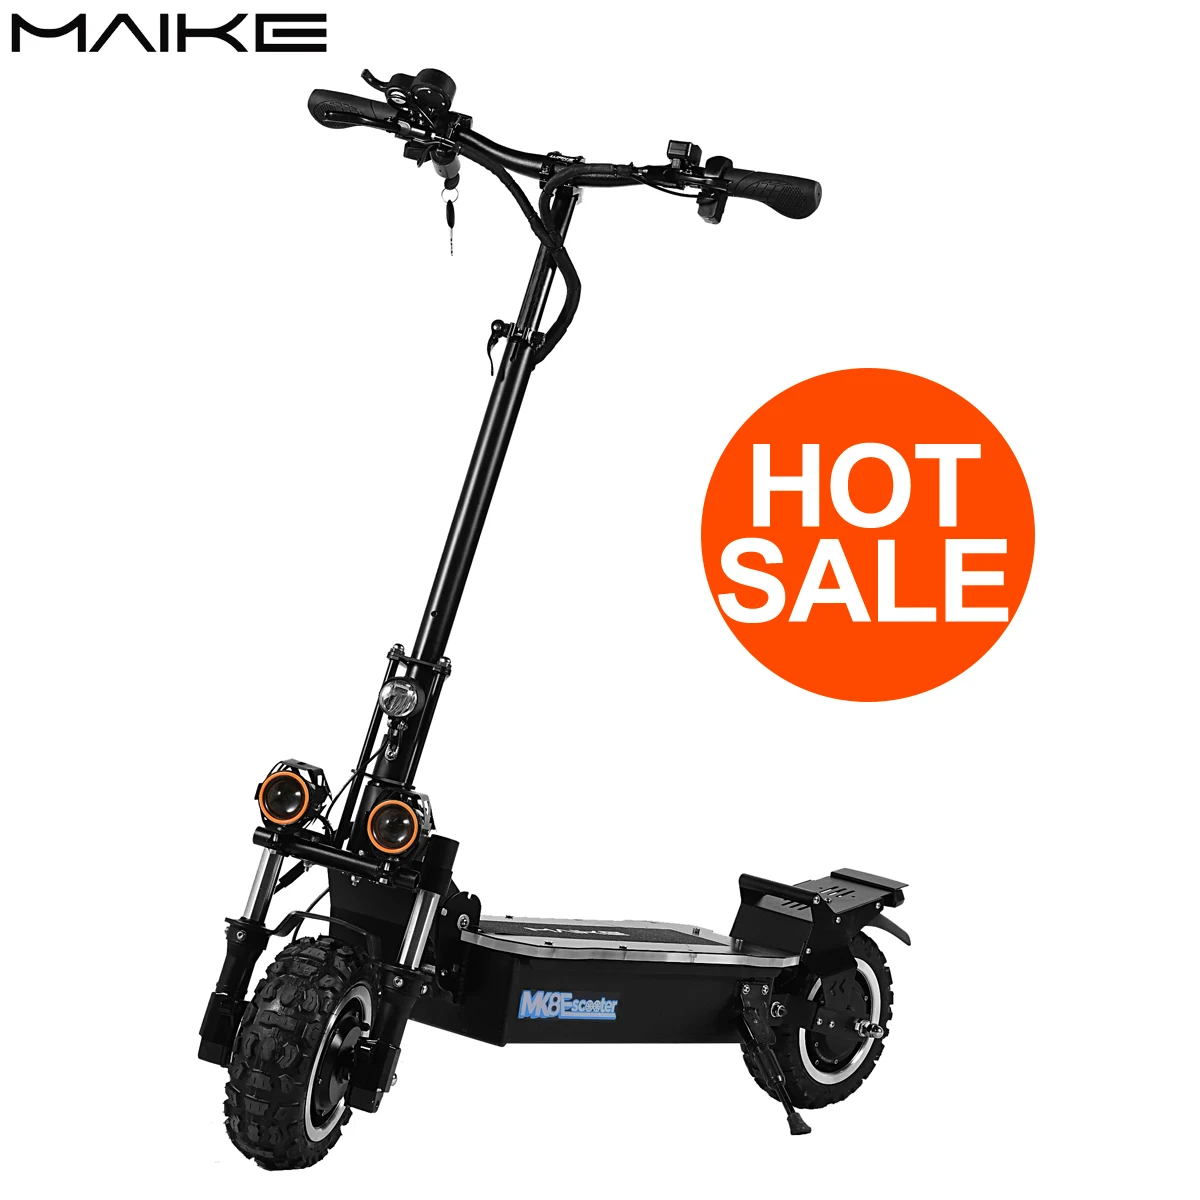 

New arrival Maike MK8 adult off road 3200W dual motor 1600W*2 offroad foldable electric scooter